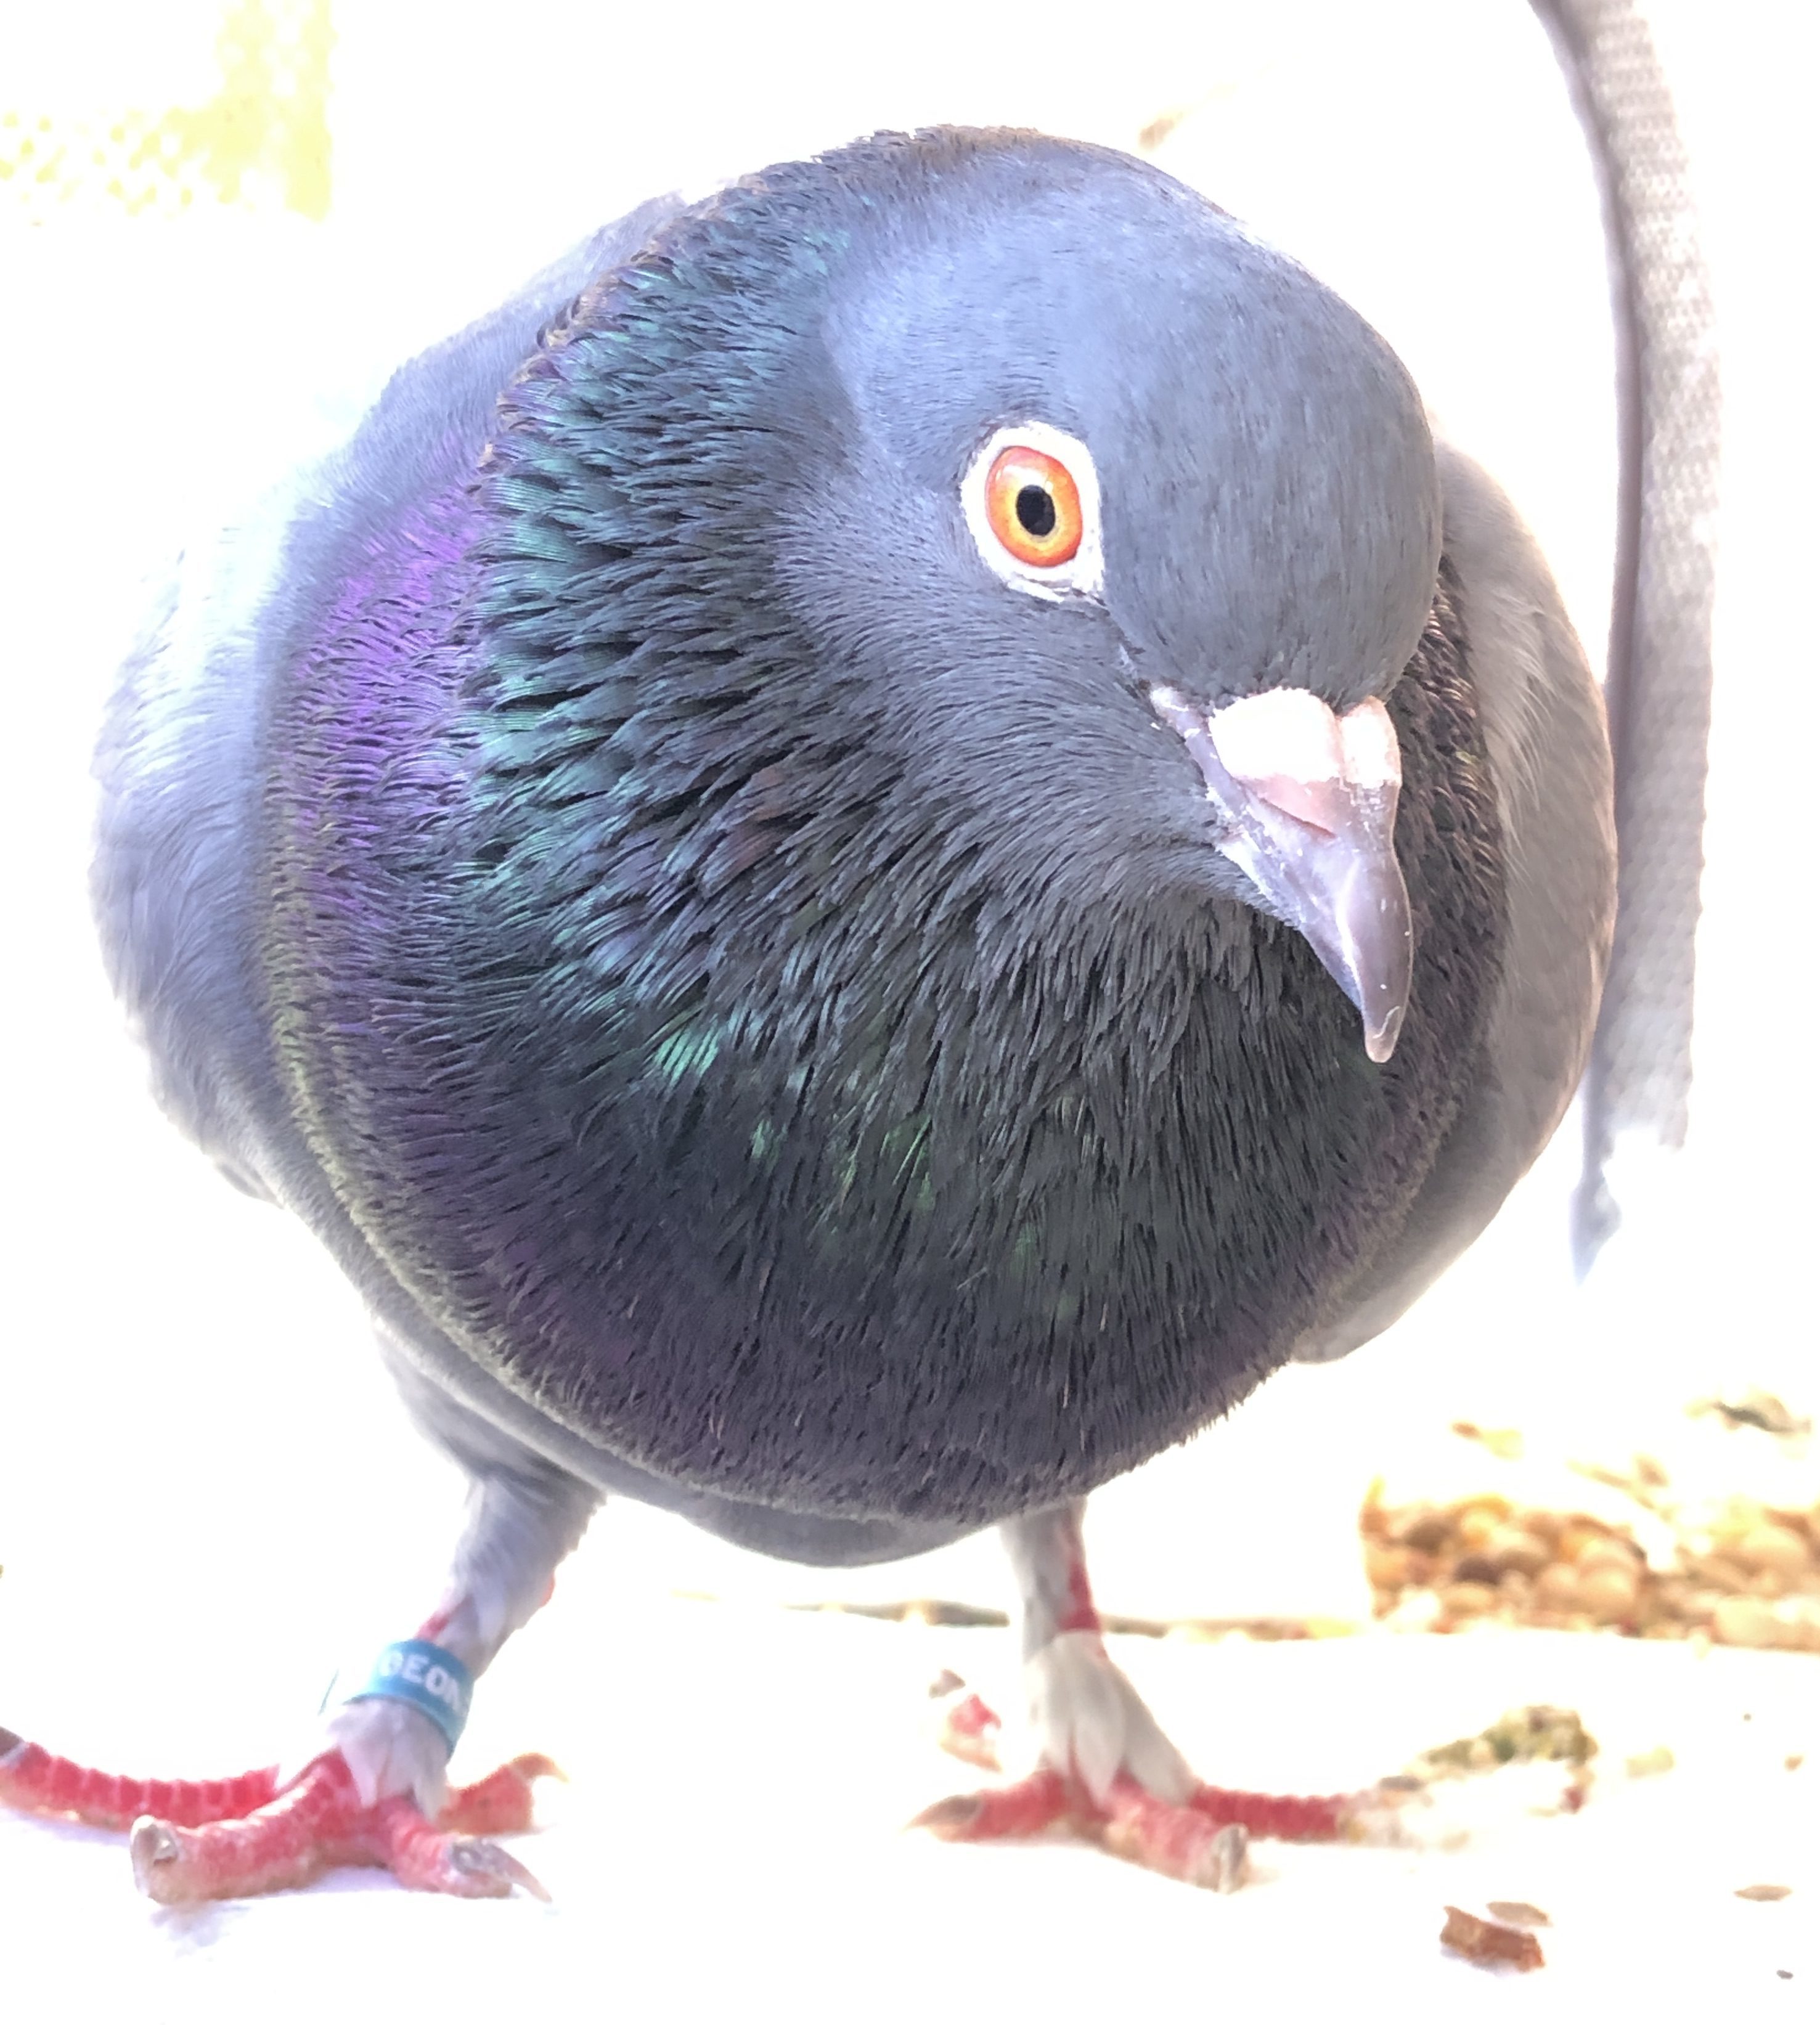 Pet pigeon in his leg band